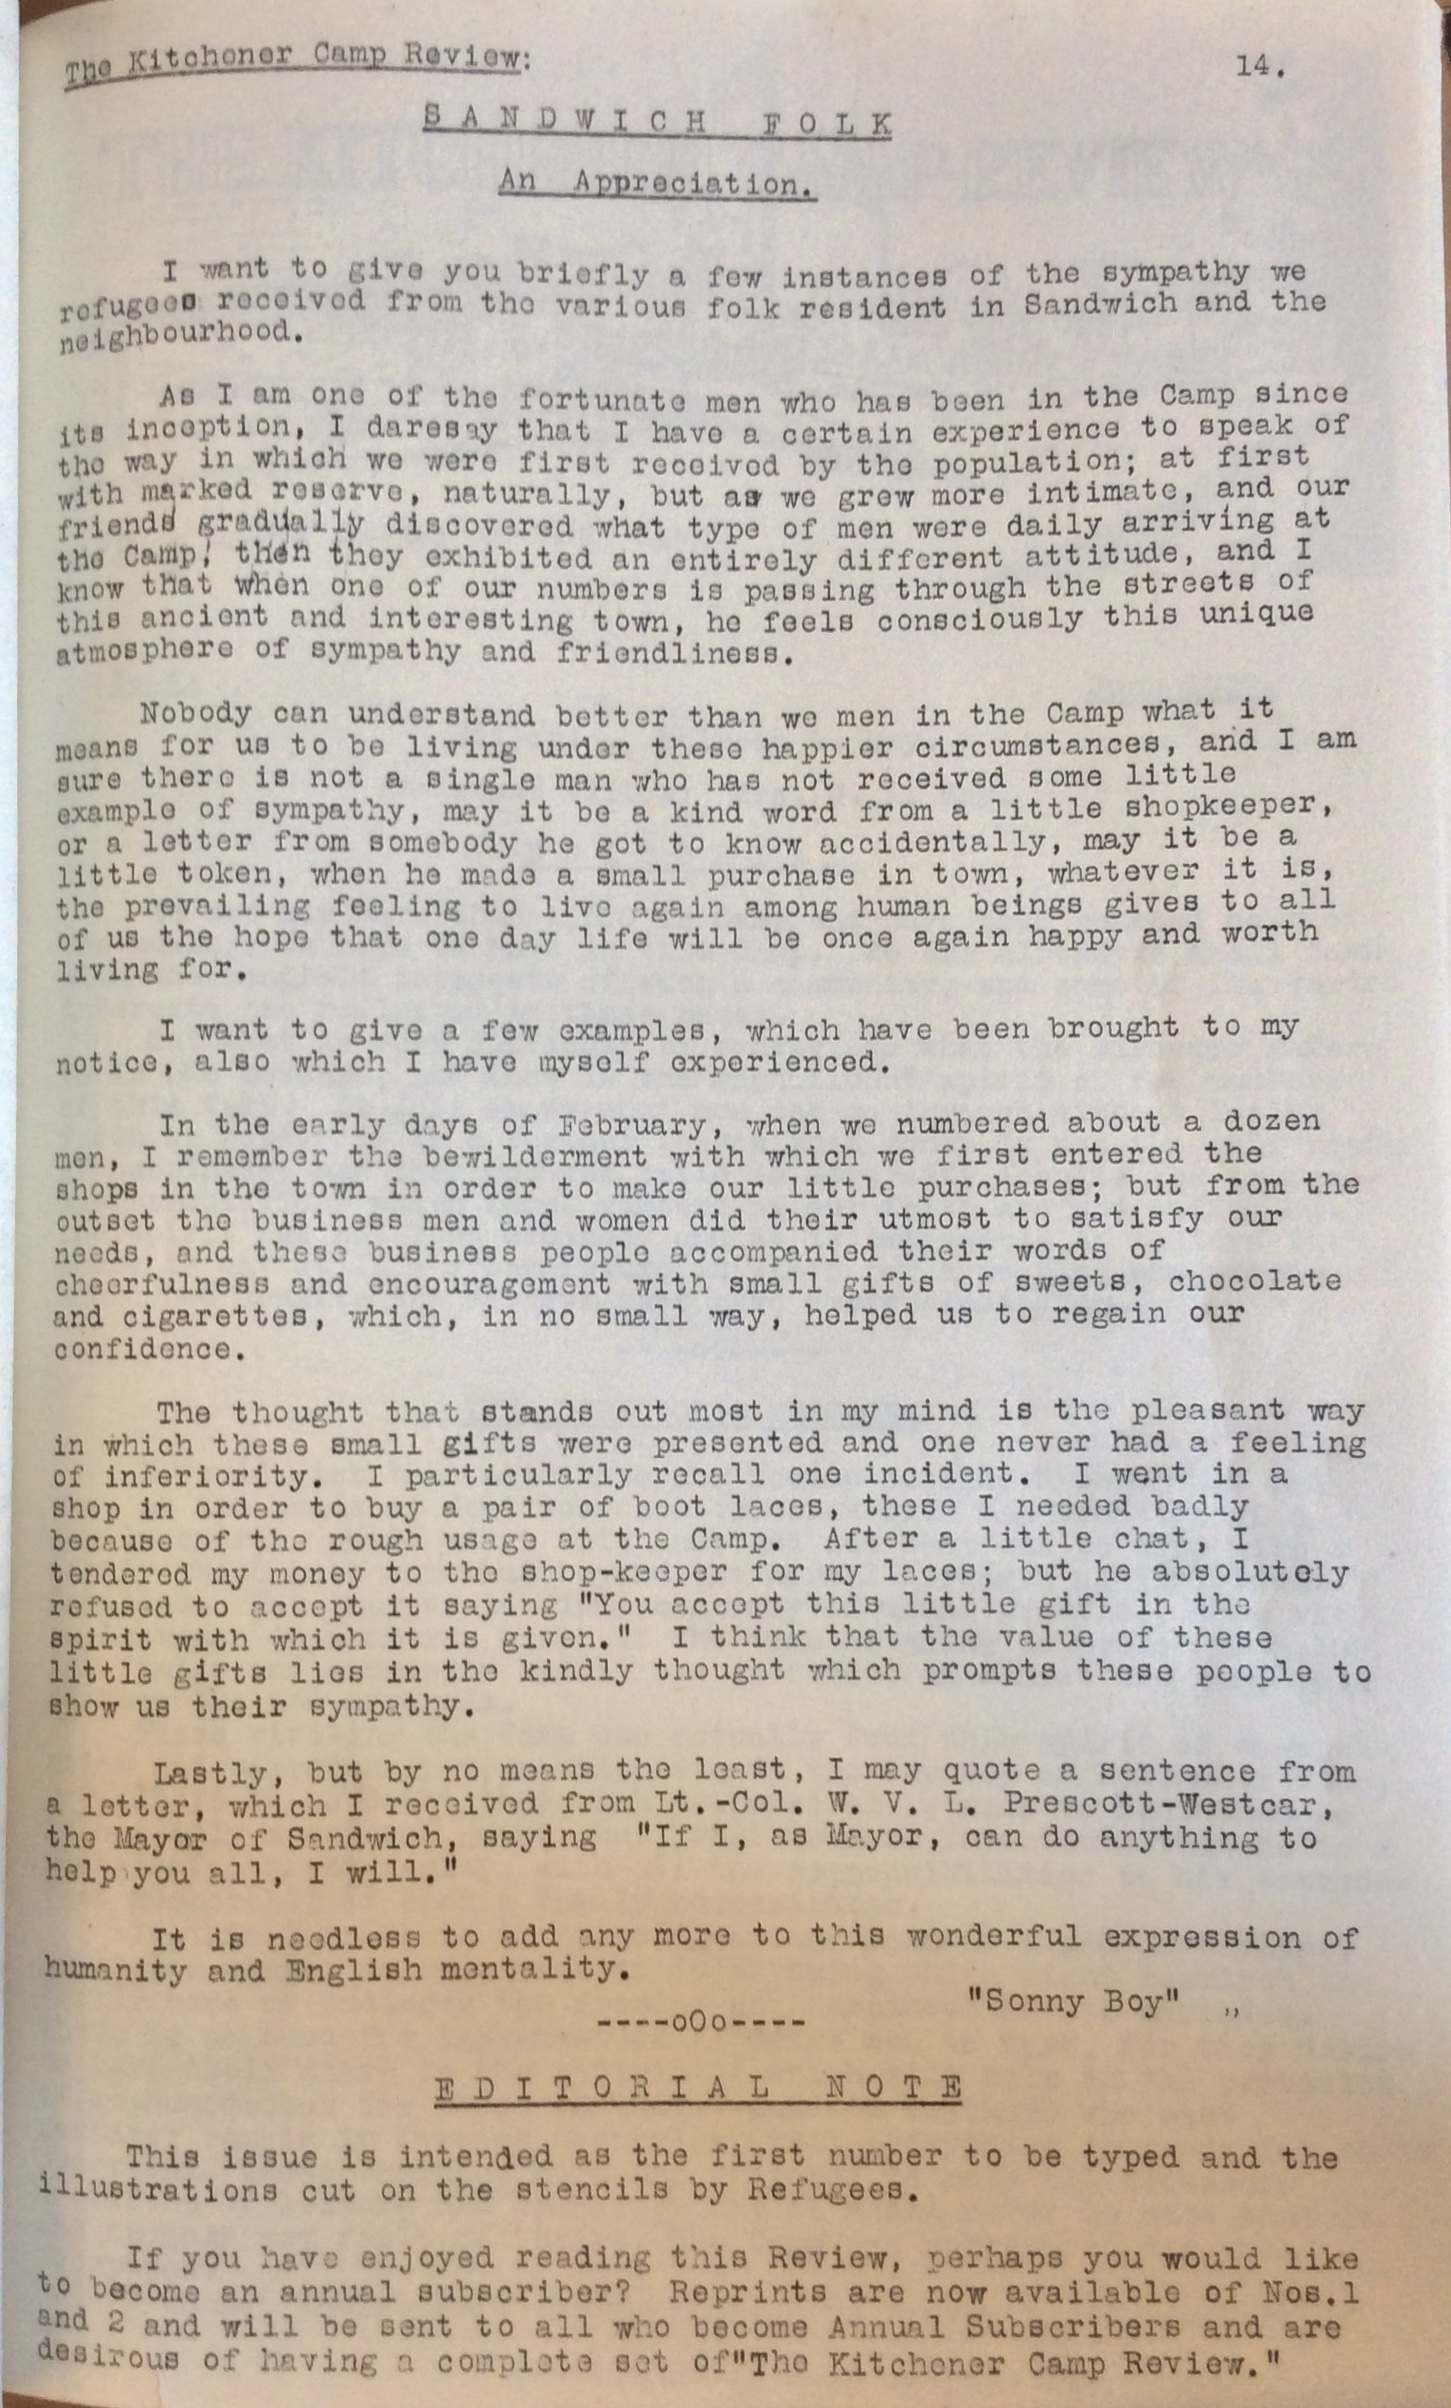 Kitchener Camp Review, May 1939, page 14